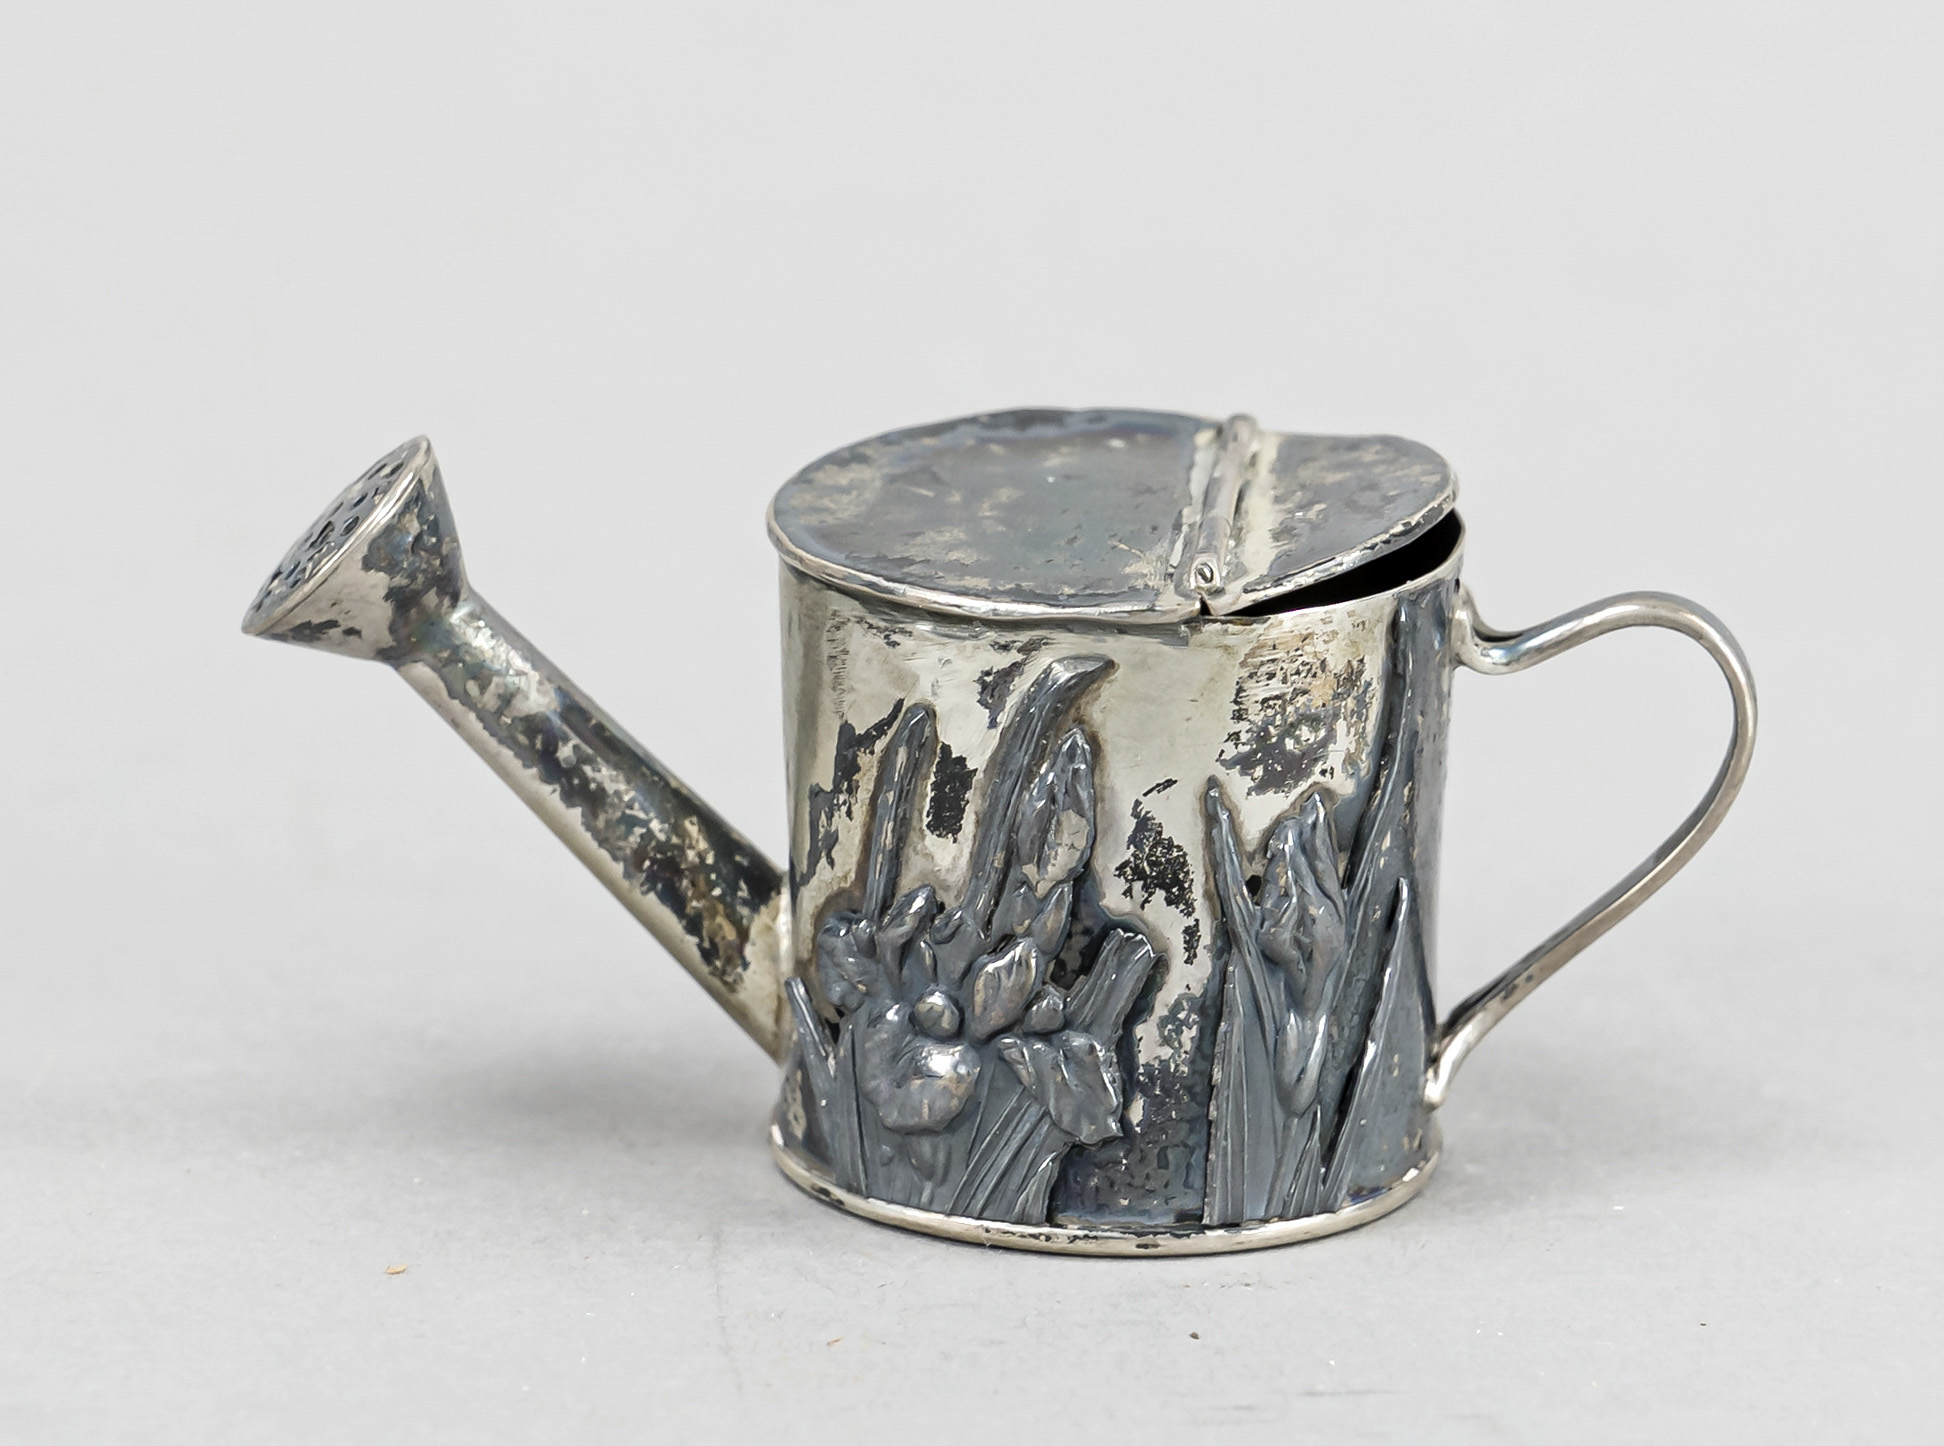 Miniature watering can, East Asia (?), early 20th century, cylindrical form, wall with floral relief